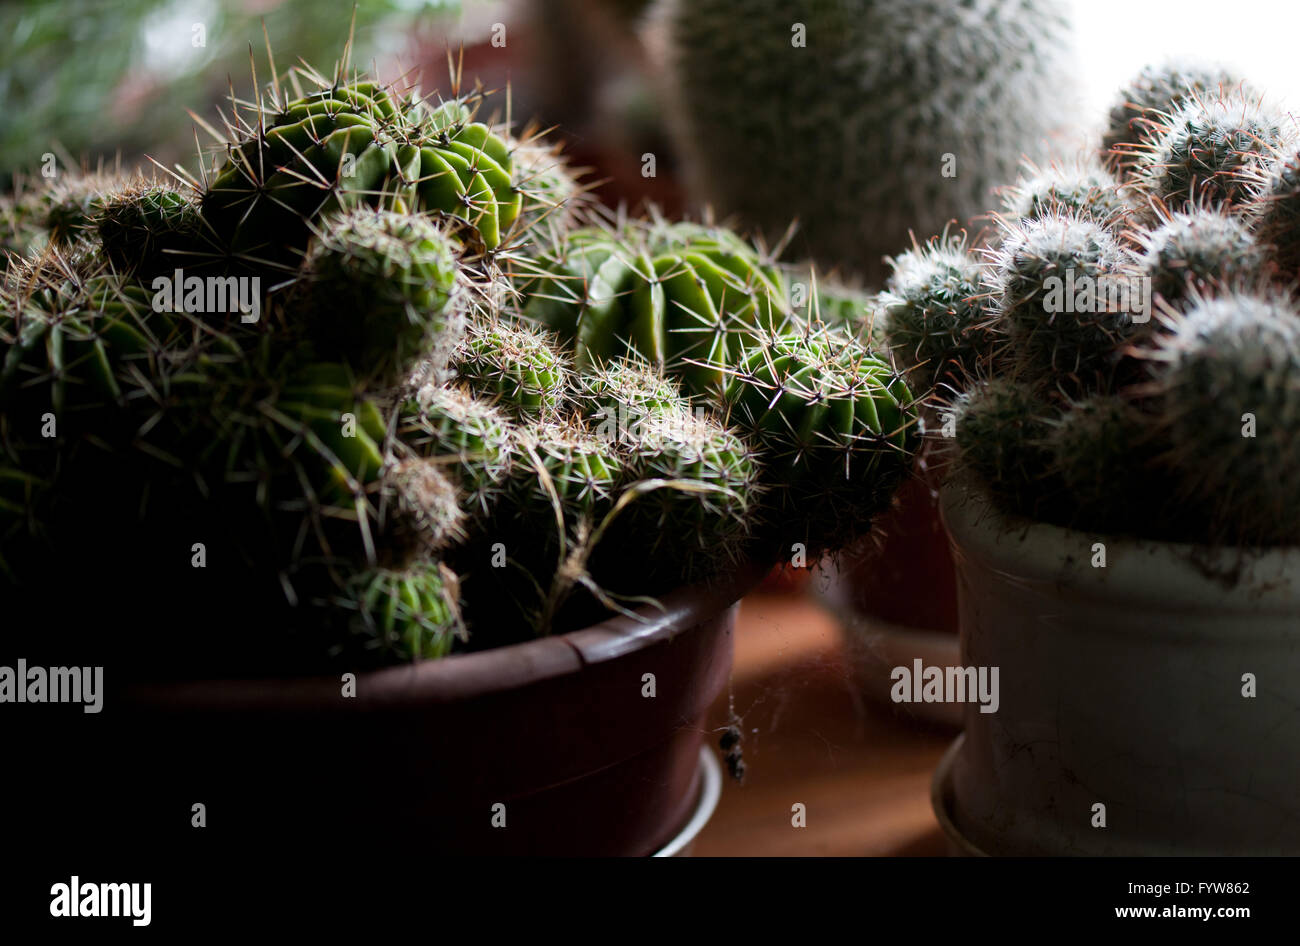 Spiny cactuses plants in flowerpots, green cacti grow in dark cellar interior with cold temperature during winter, cactus detail Stock Photo